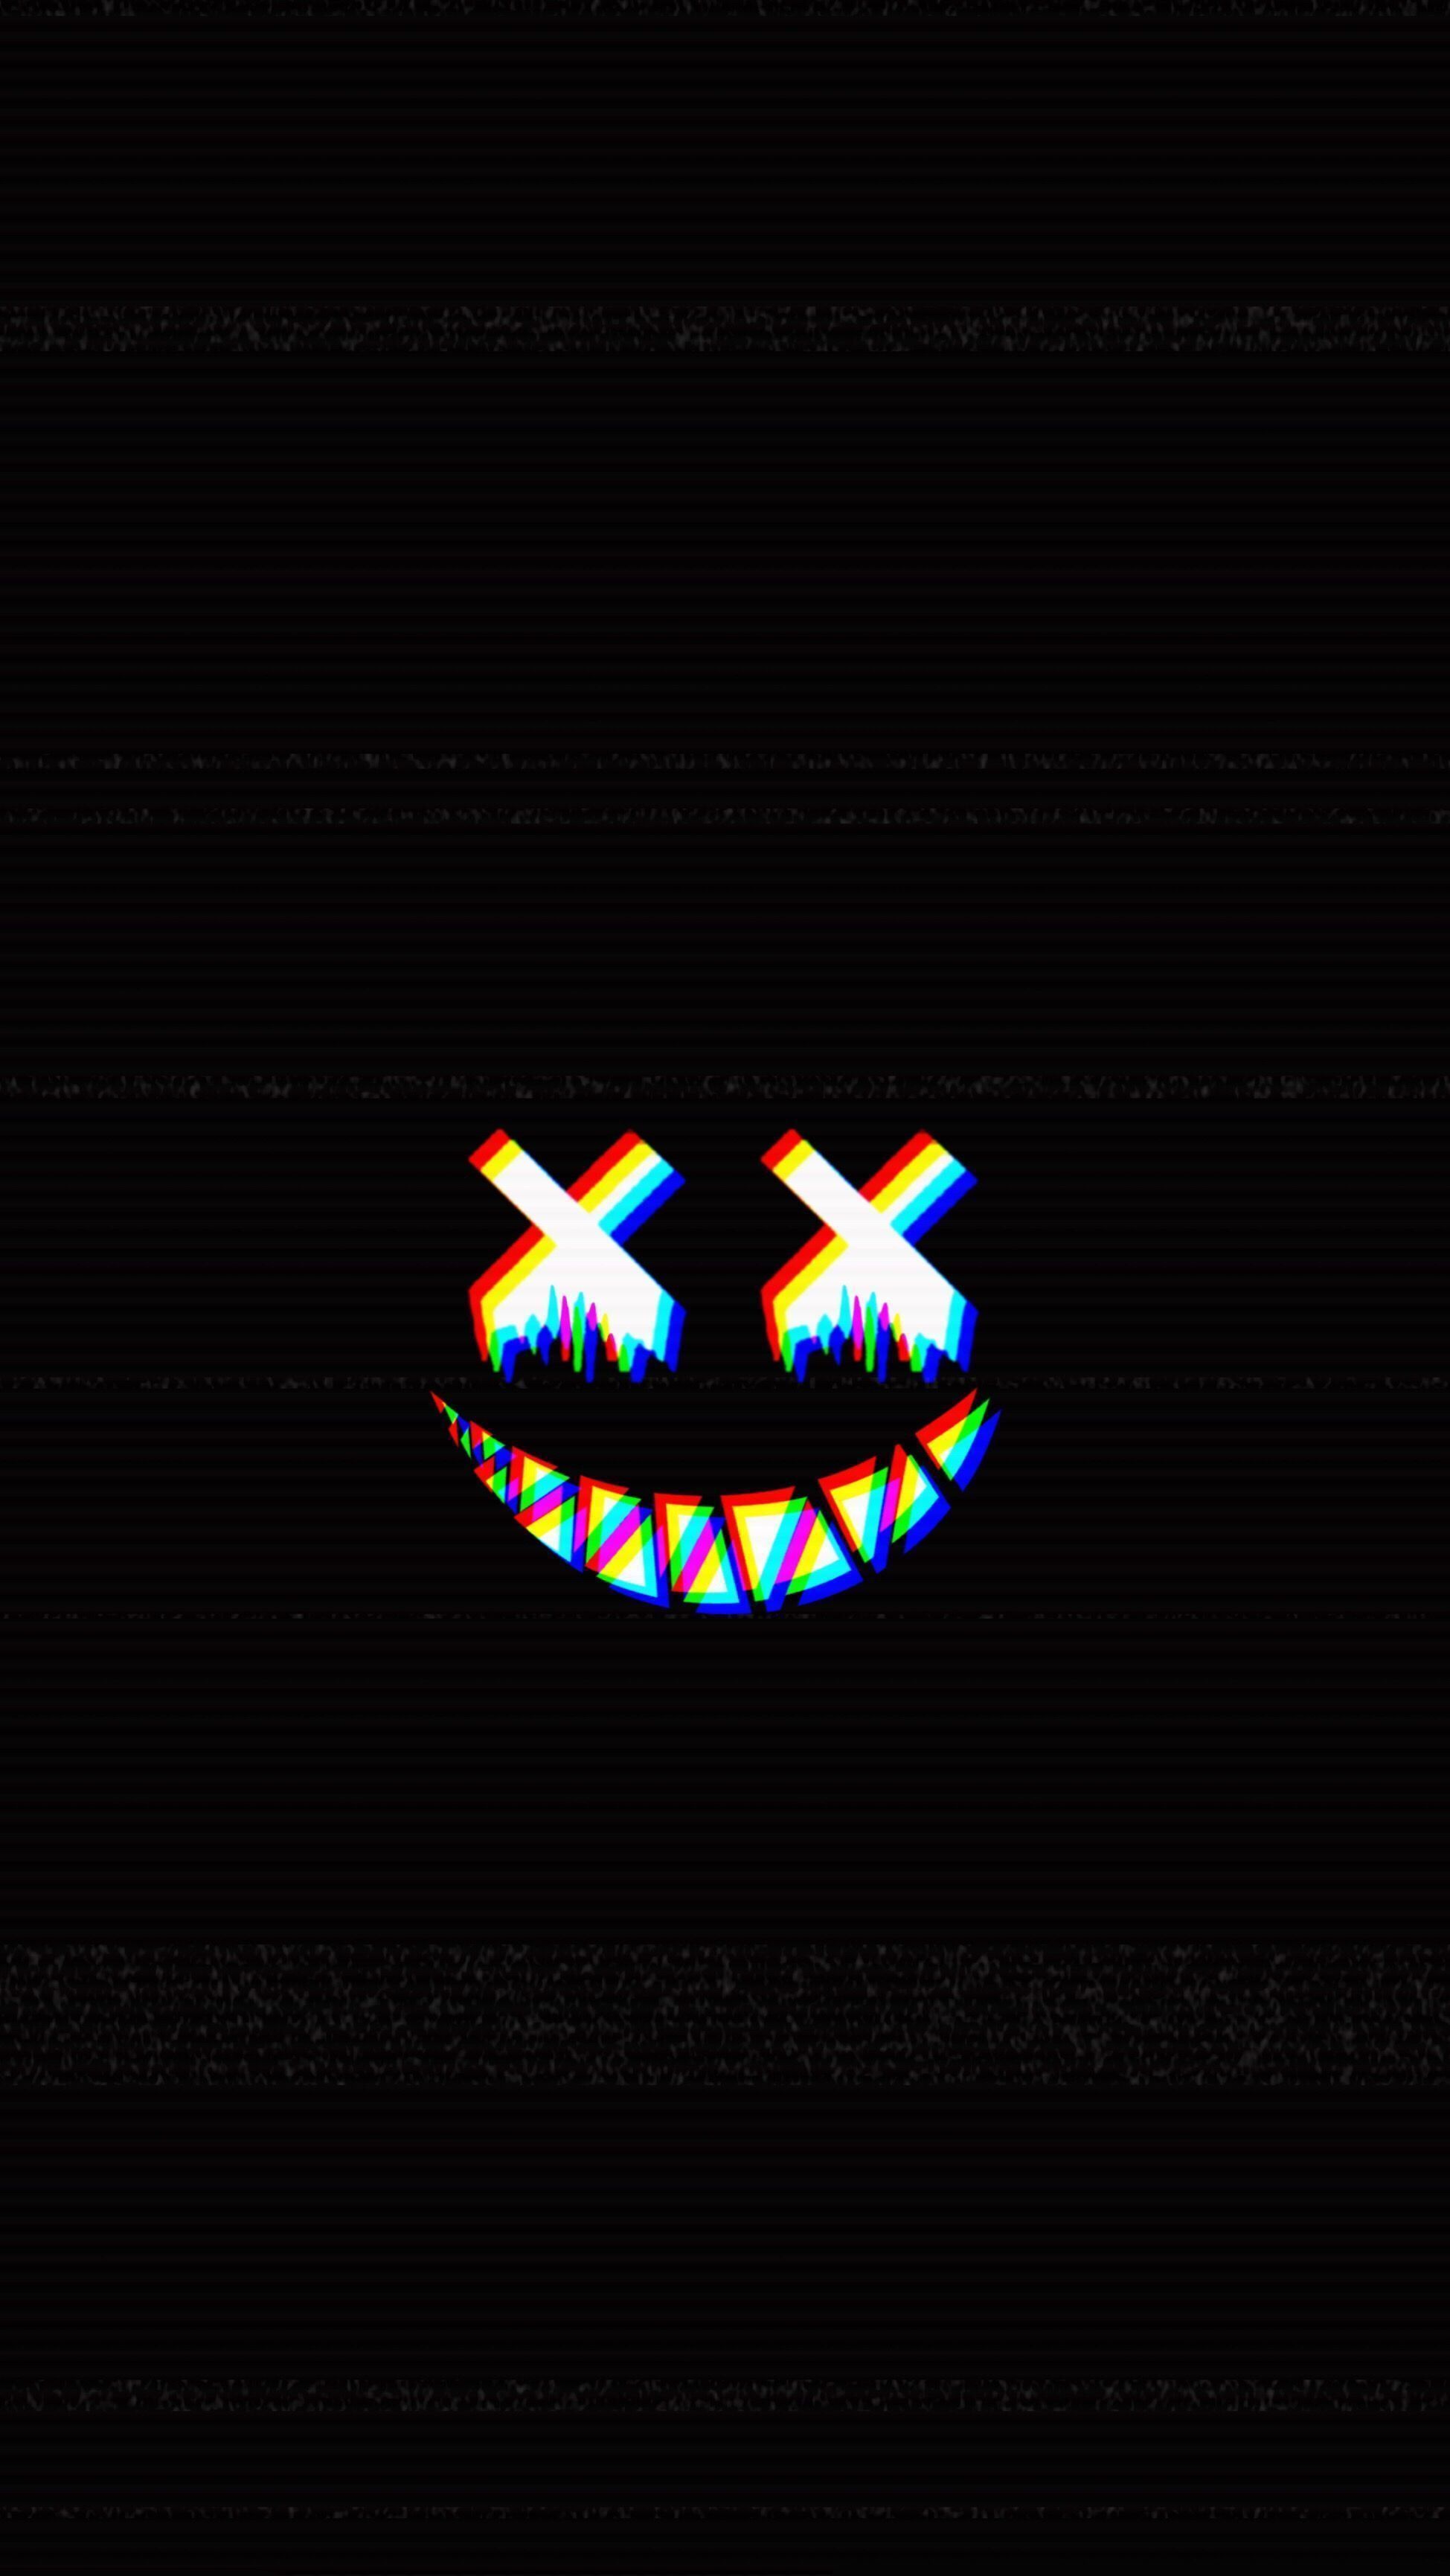 A black background with a colorful smiley face in the center - Dark, glitch, black glitch